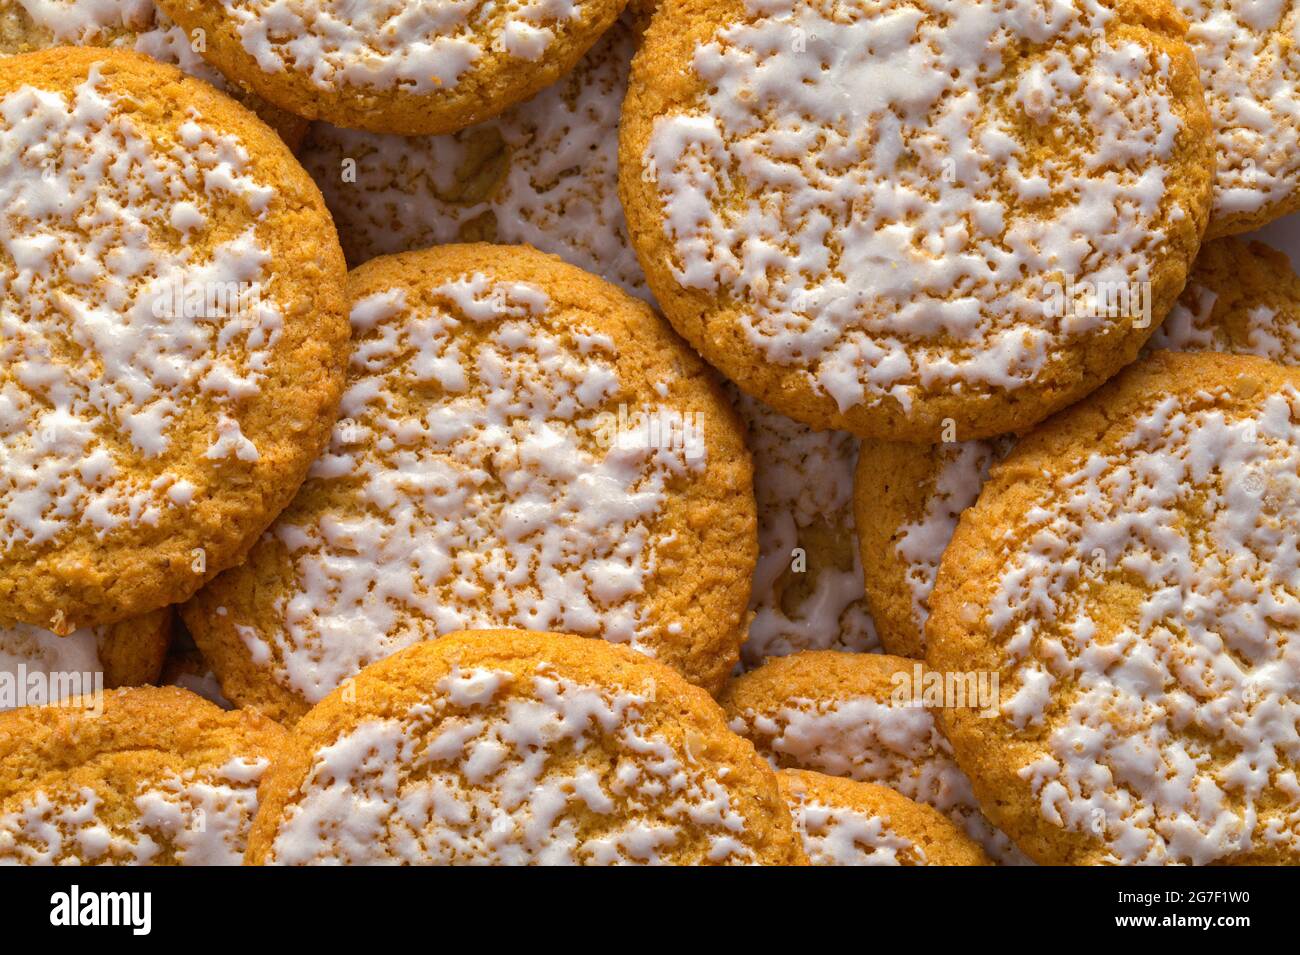 Pile of Frosted Oatmeal Cookies Background Texture. Stock Photo